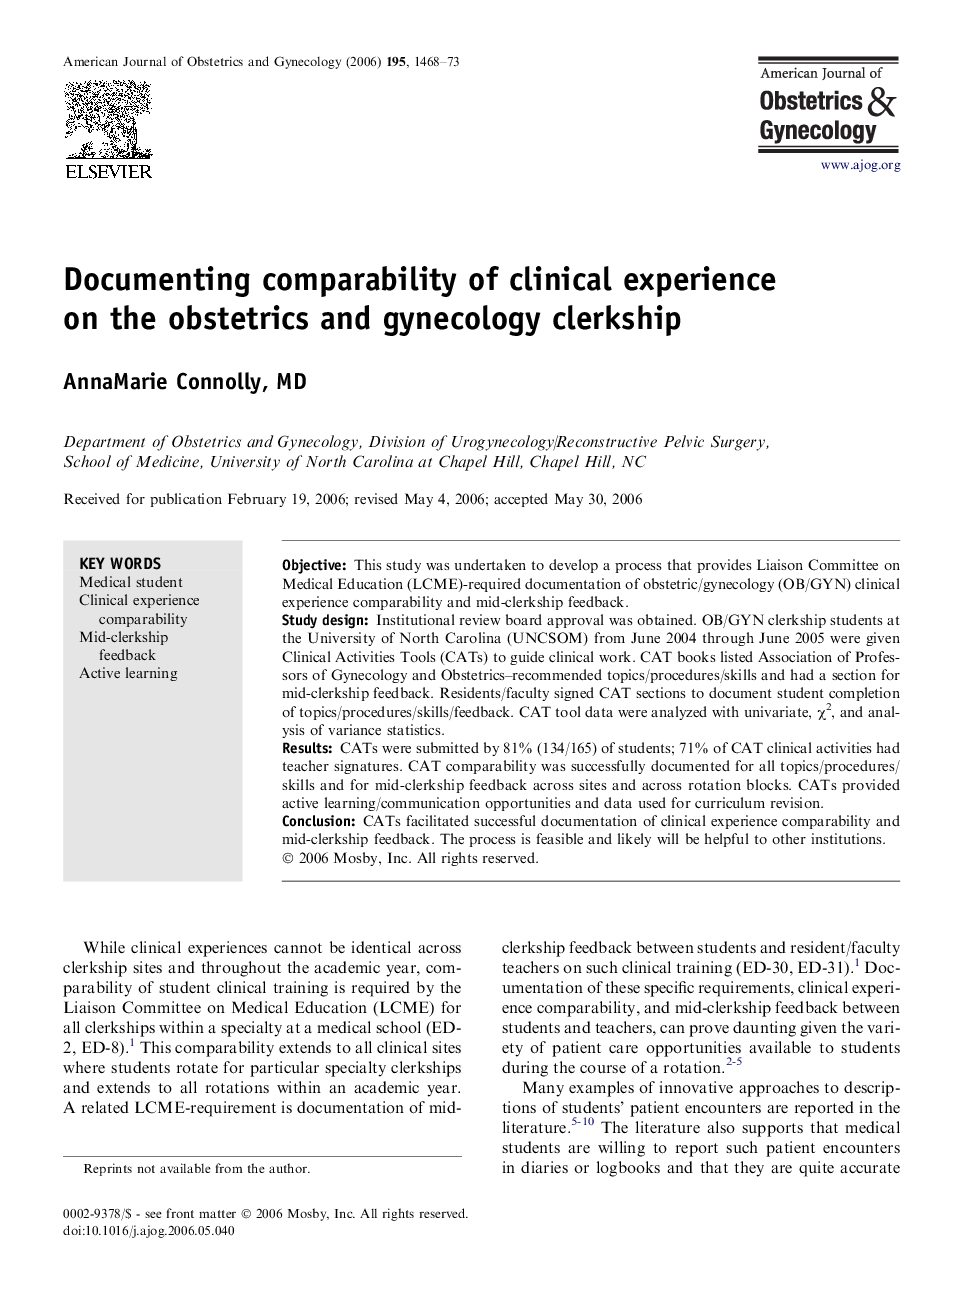 Documenting comparability of clinical experience on the obstetrics and gynecology clerkship 